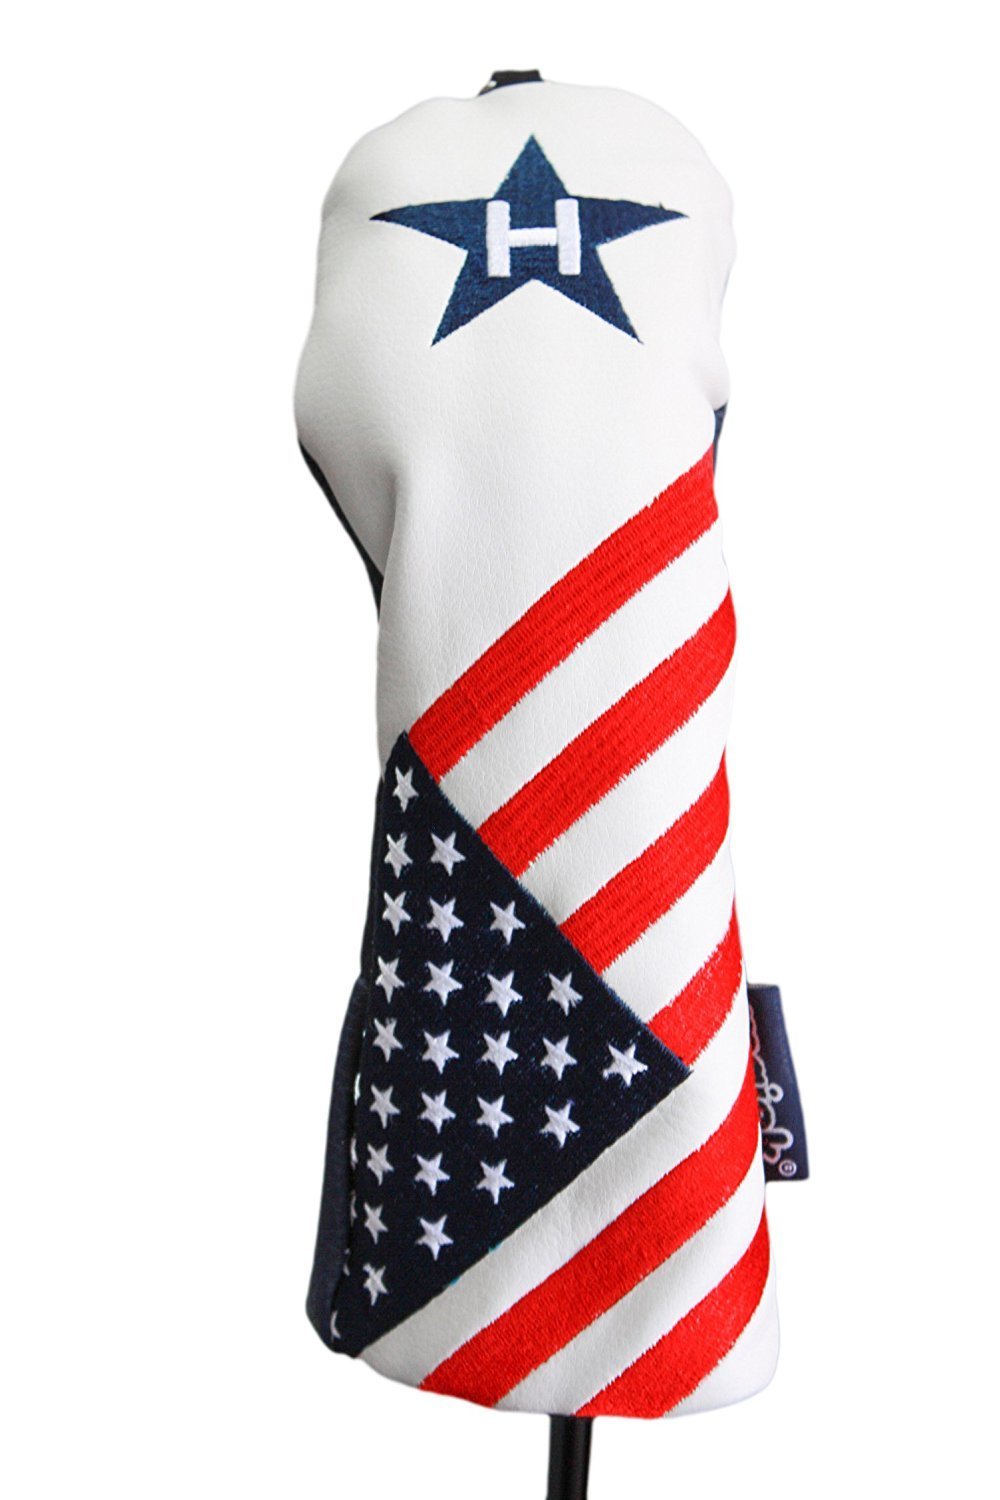 USA X & H Headcover Patriot Golf Vintage Retro Patriotic Fairway Wood and Hybrid Head Cover Fits All Modern Fairway Wood and Hybrid Clubs - image 4 of 4